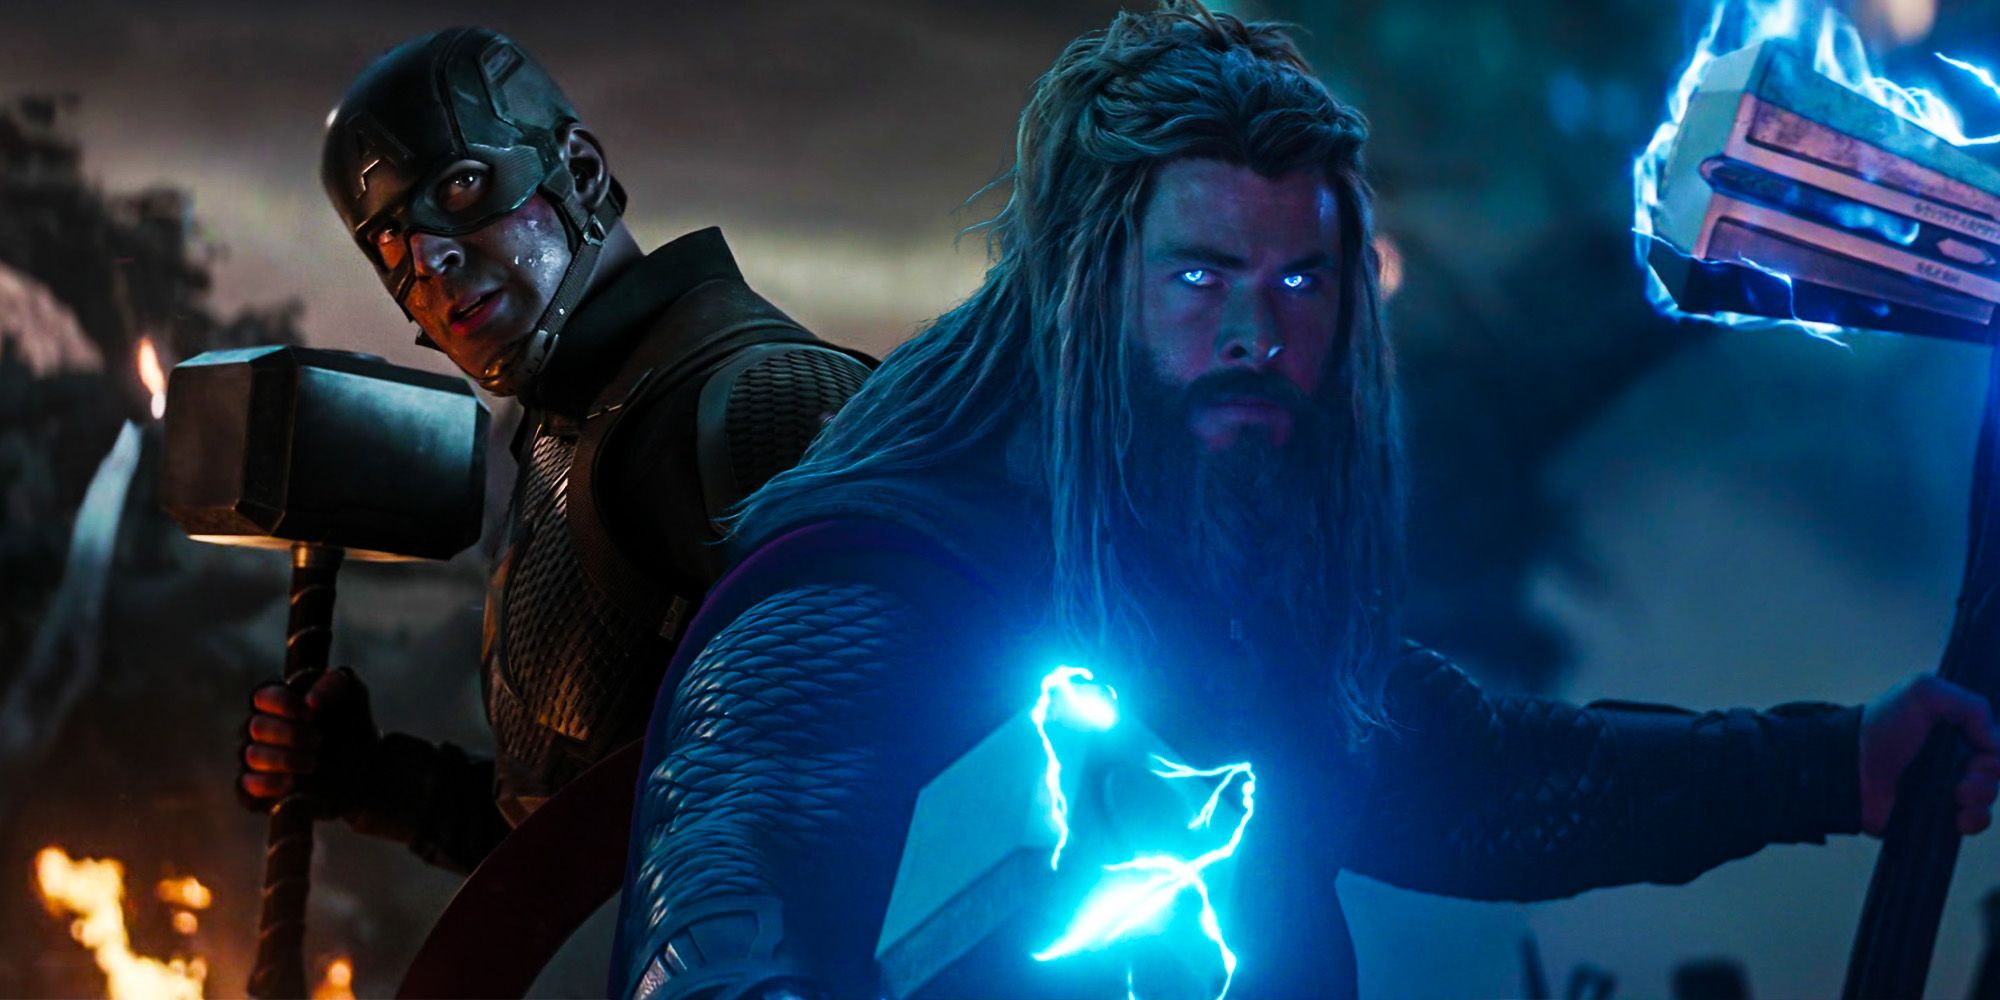 Thor love and thunder sets up cooler moment than captain america wielding Mjolnir